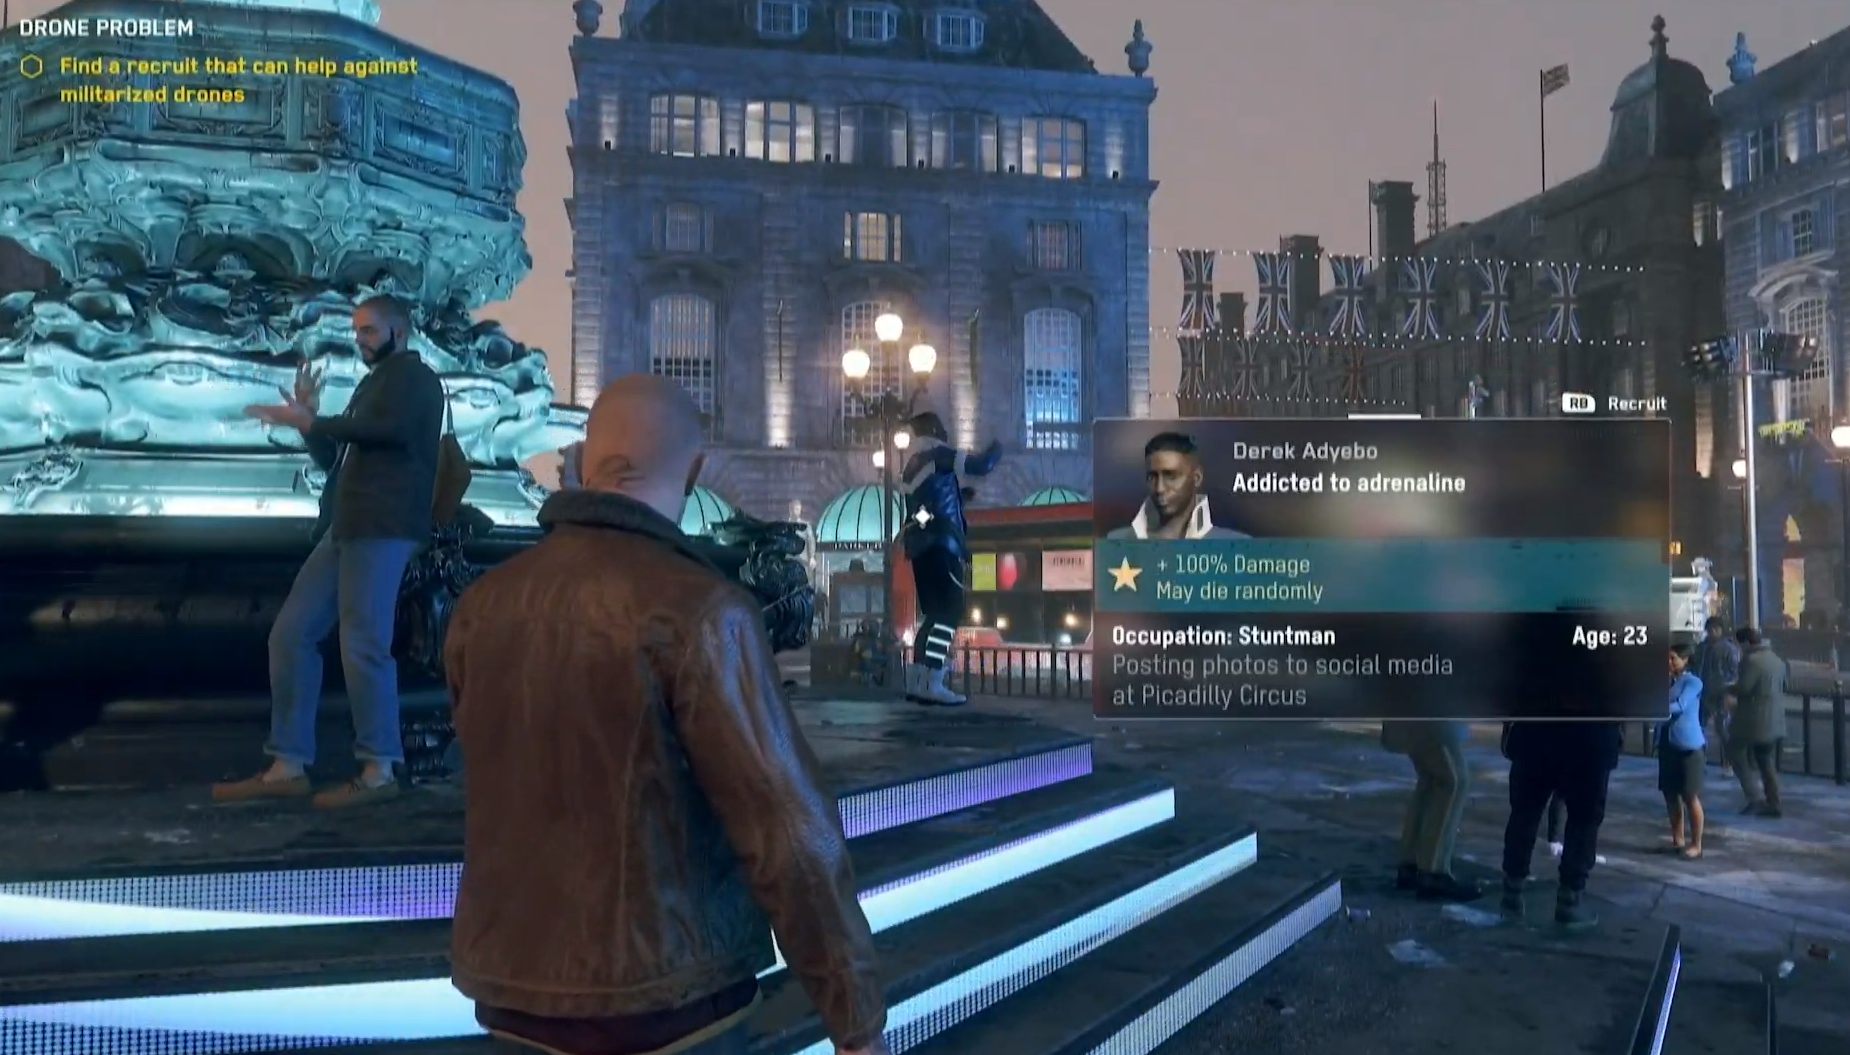 Watch Dogs Legion Gameplay, Co-op and Release Date Details